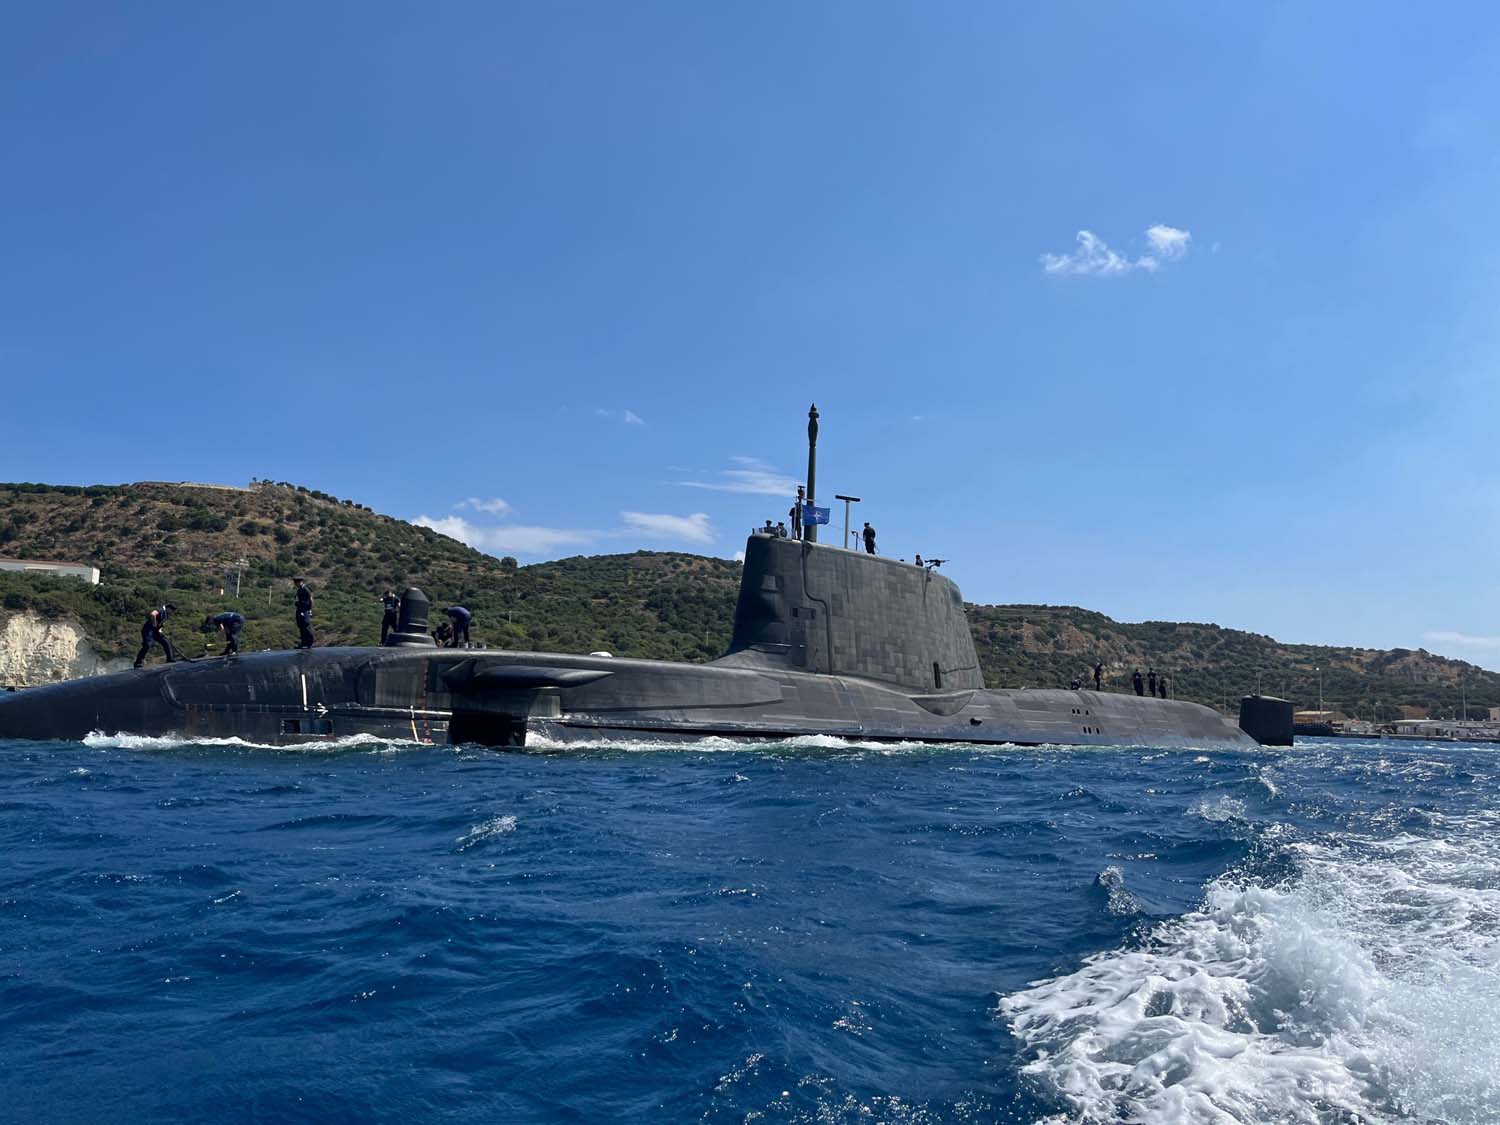 Royal Navy’s newest and most capable attack submarine completes NATO security operations in the Mediterranean